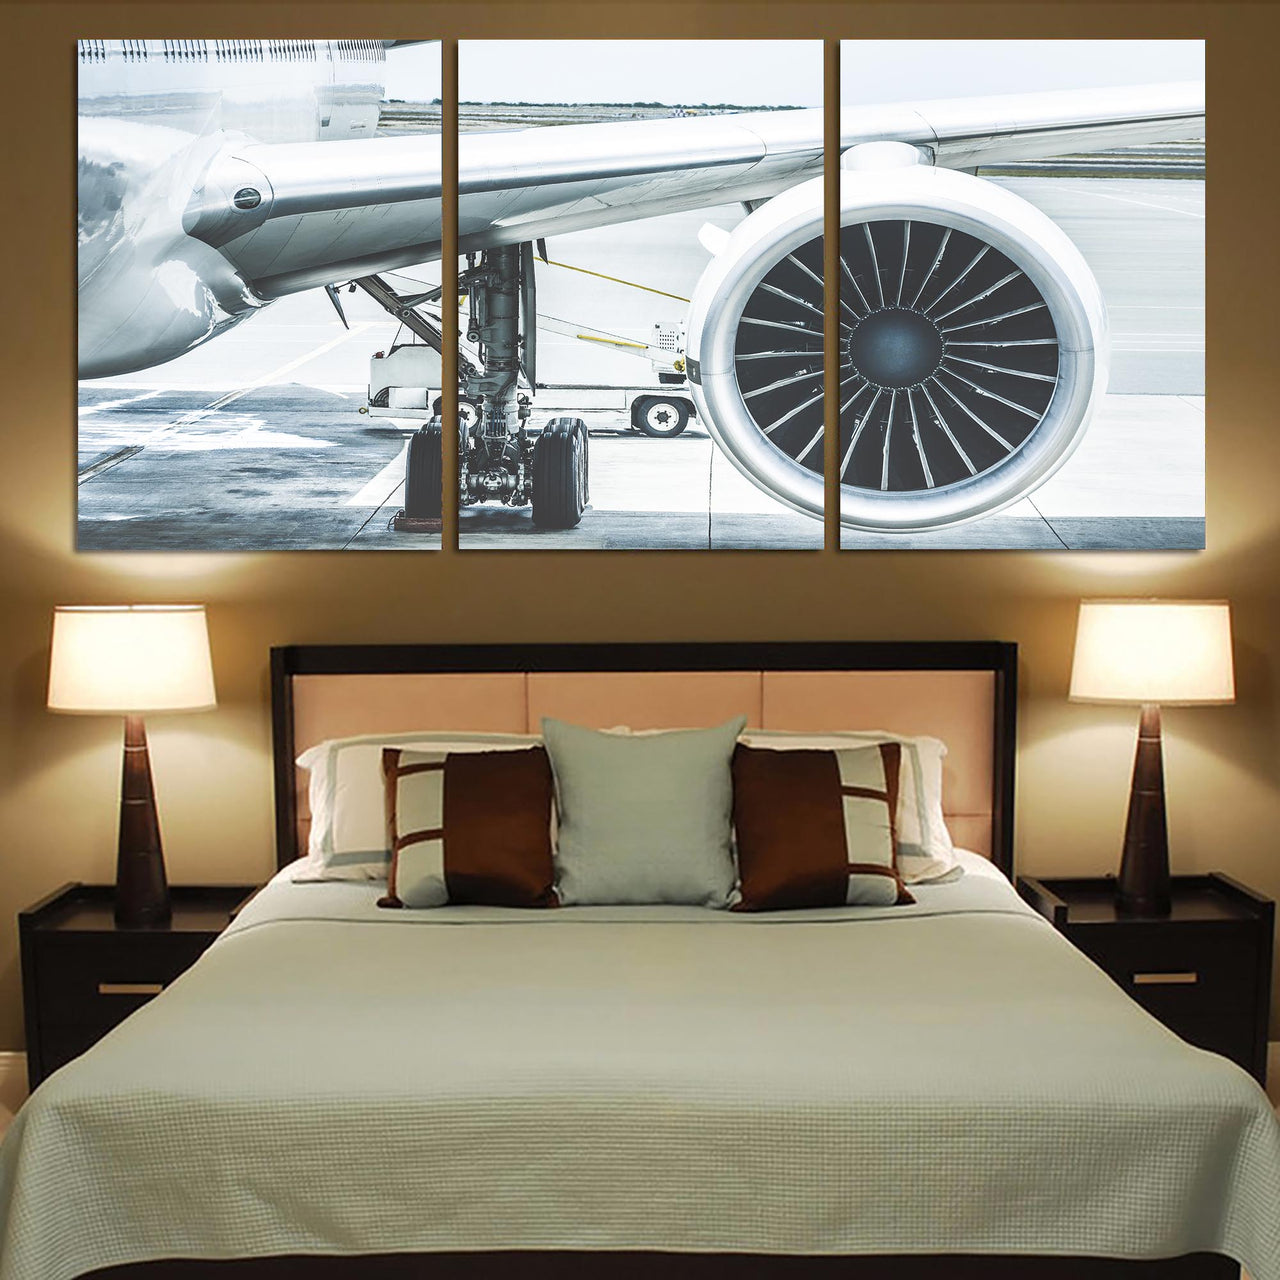 Amazing Aircraft & Engine Printed Canvas Posters (3 Pieces)